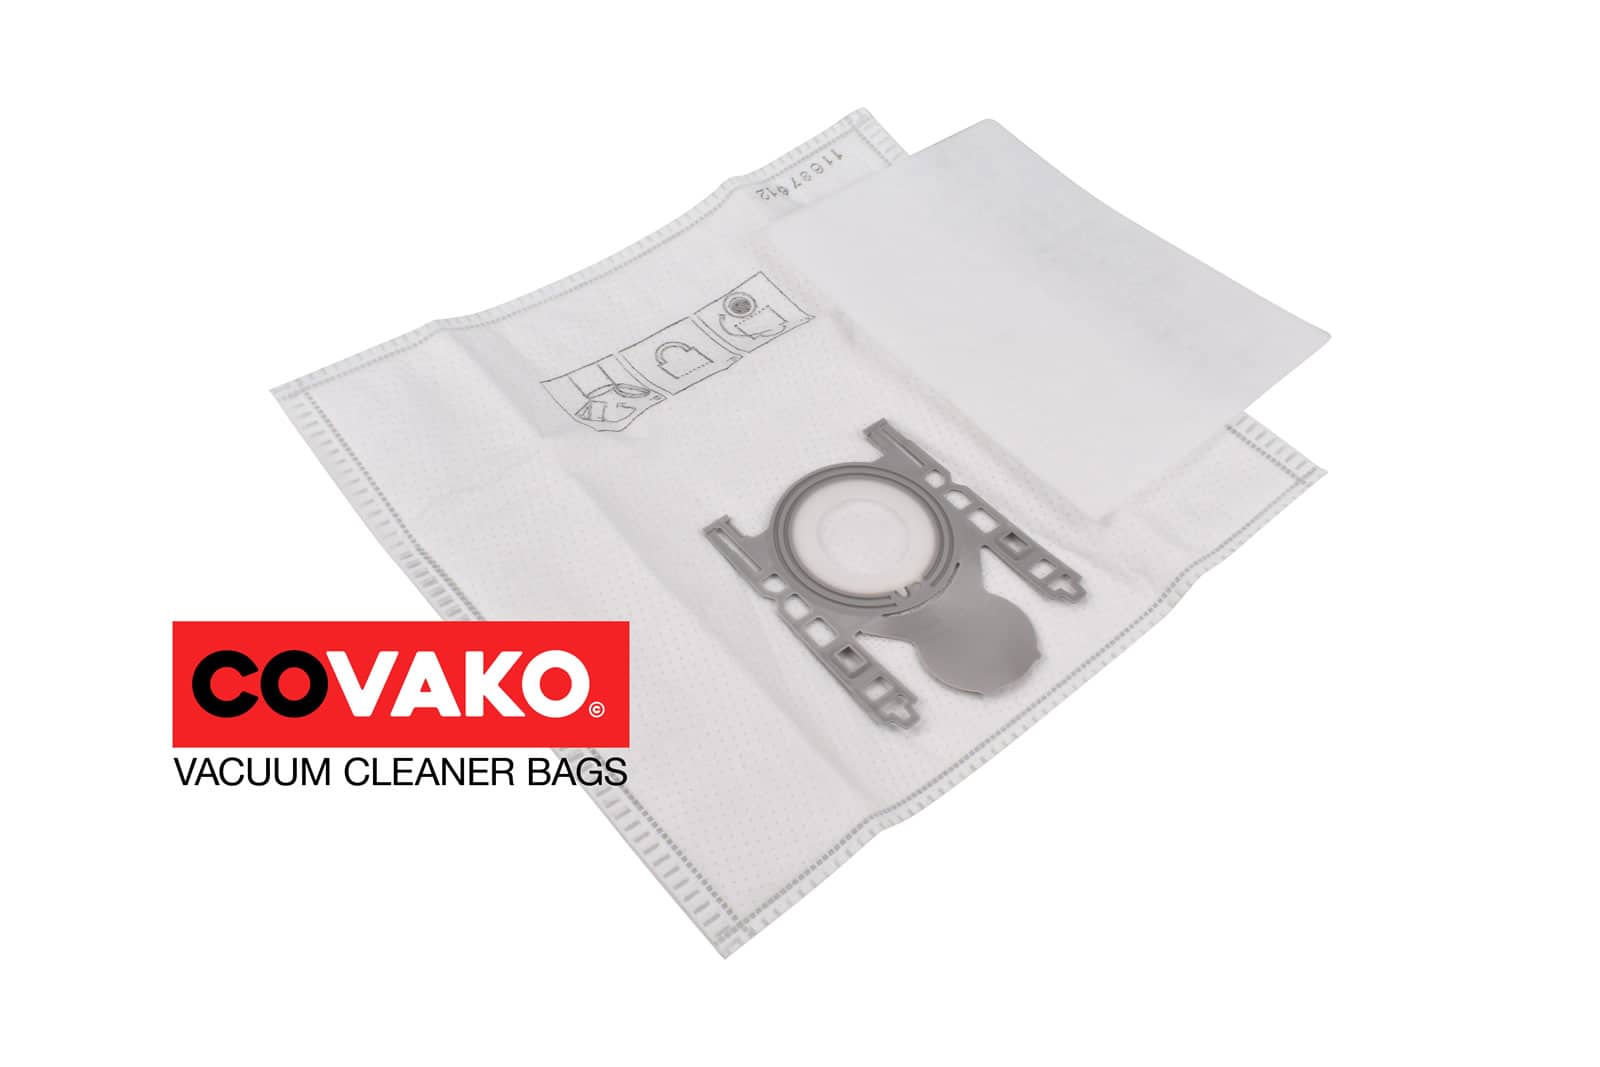 Bosch BSB 2080 / Synthesis - Bosch vacuum cleaner bags